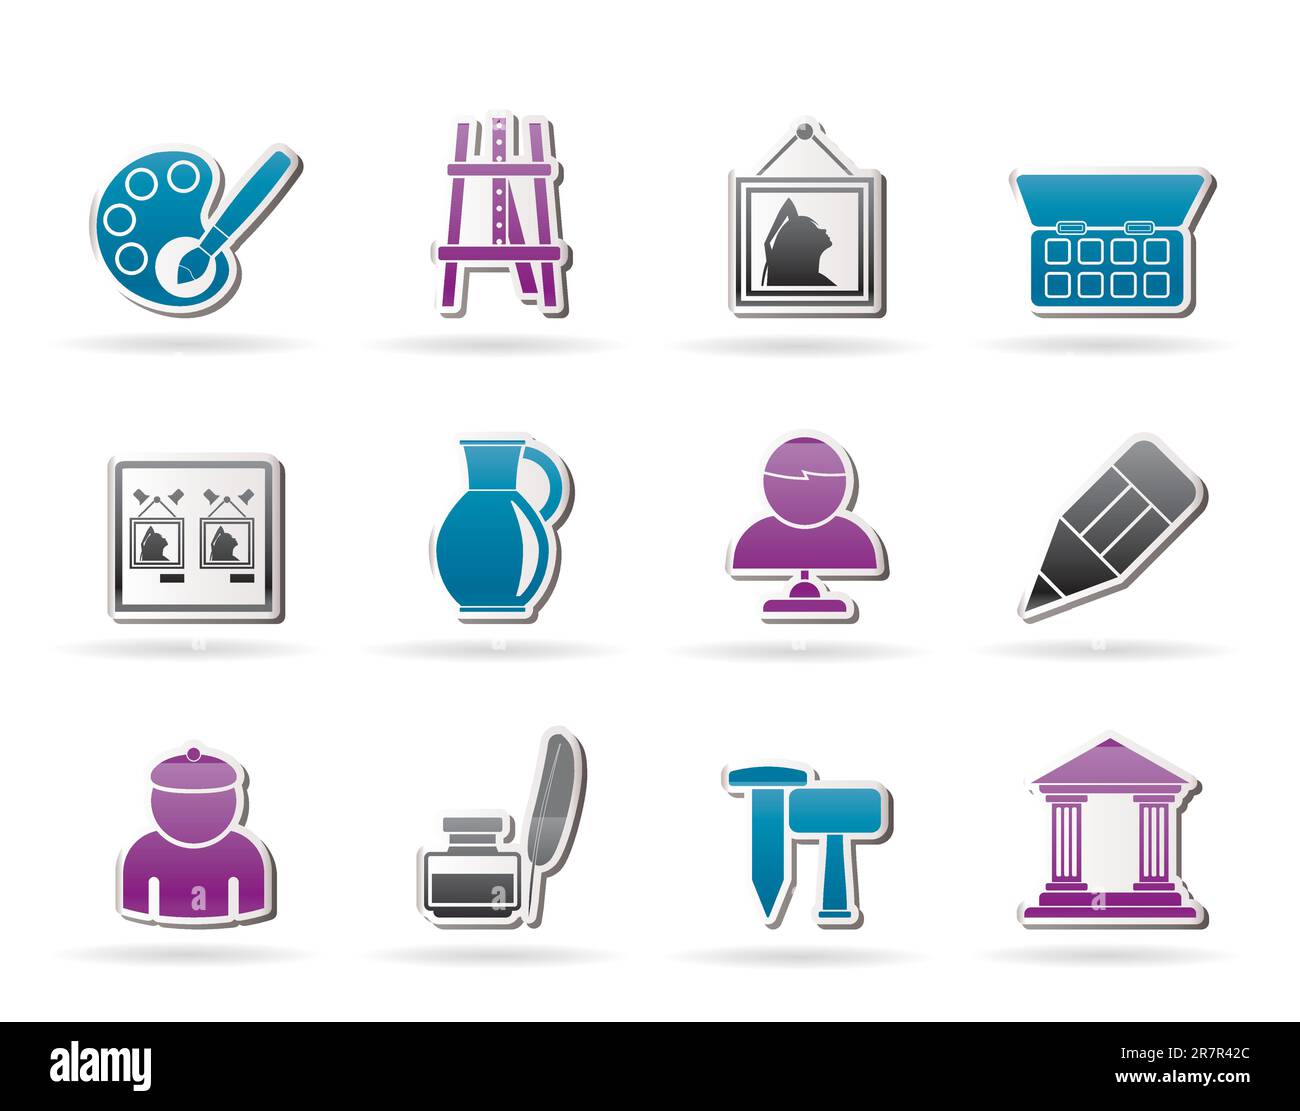 Fine art objects icons - vector icon set Stock Vector